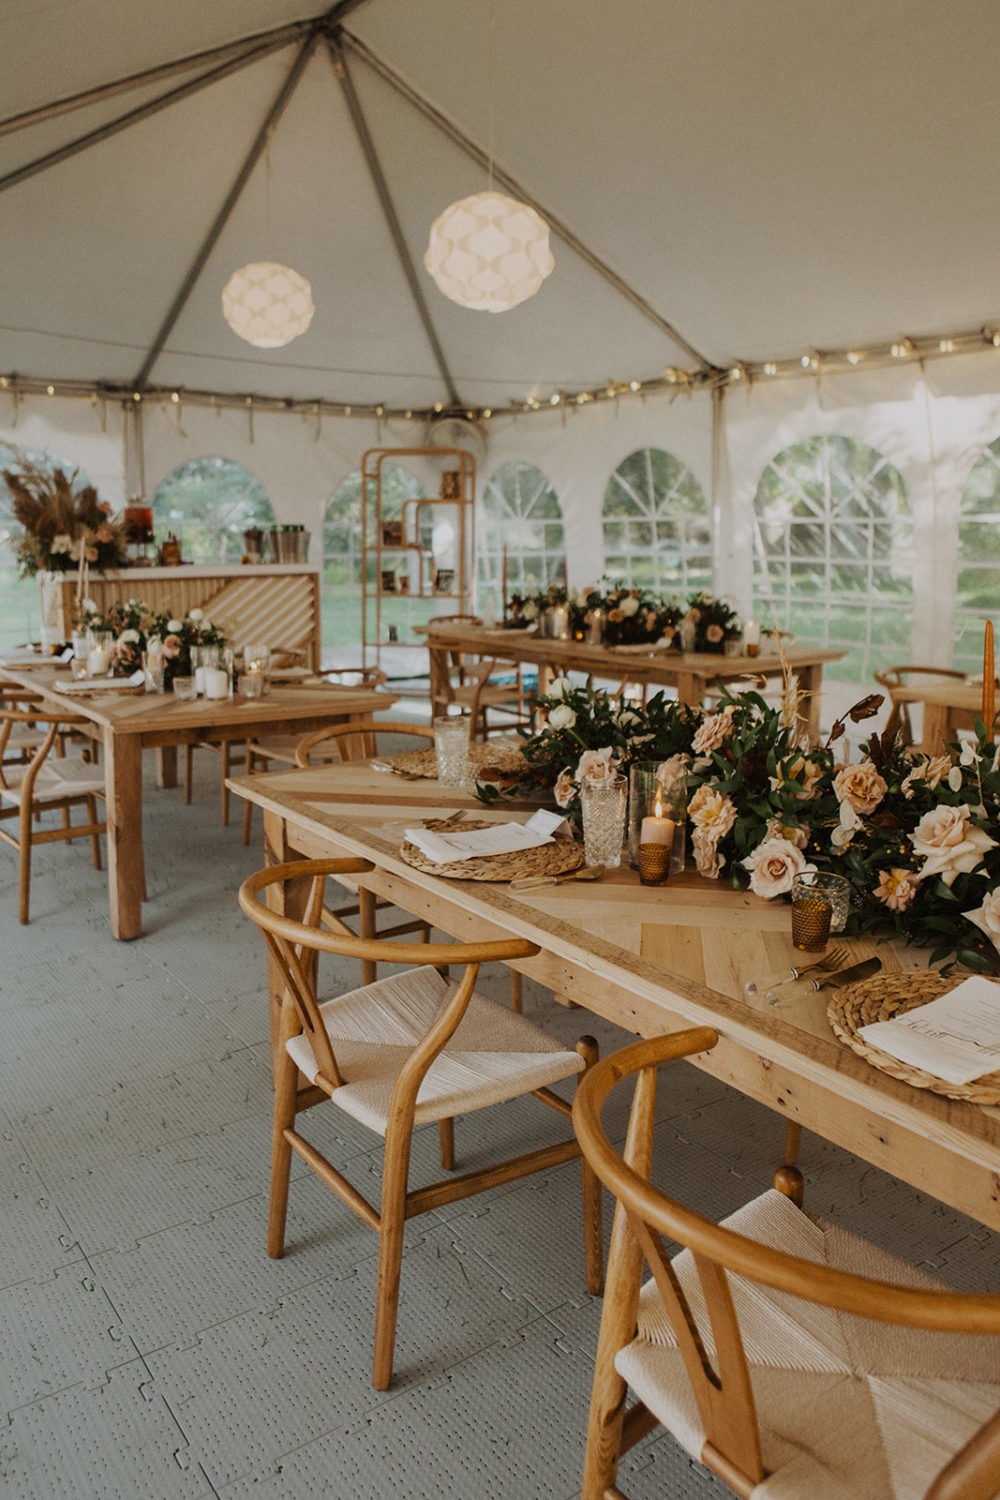 Wedding reception decorated tables in tent